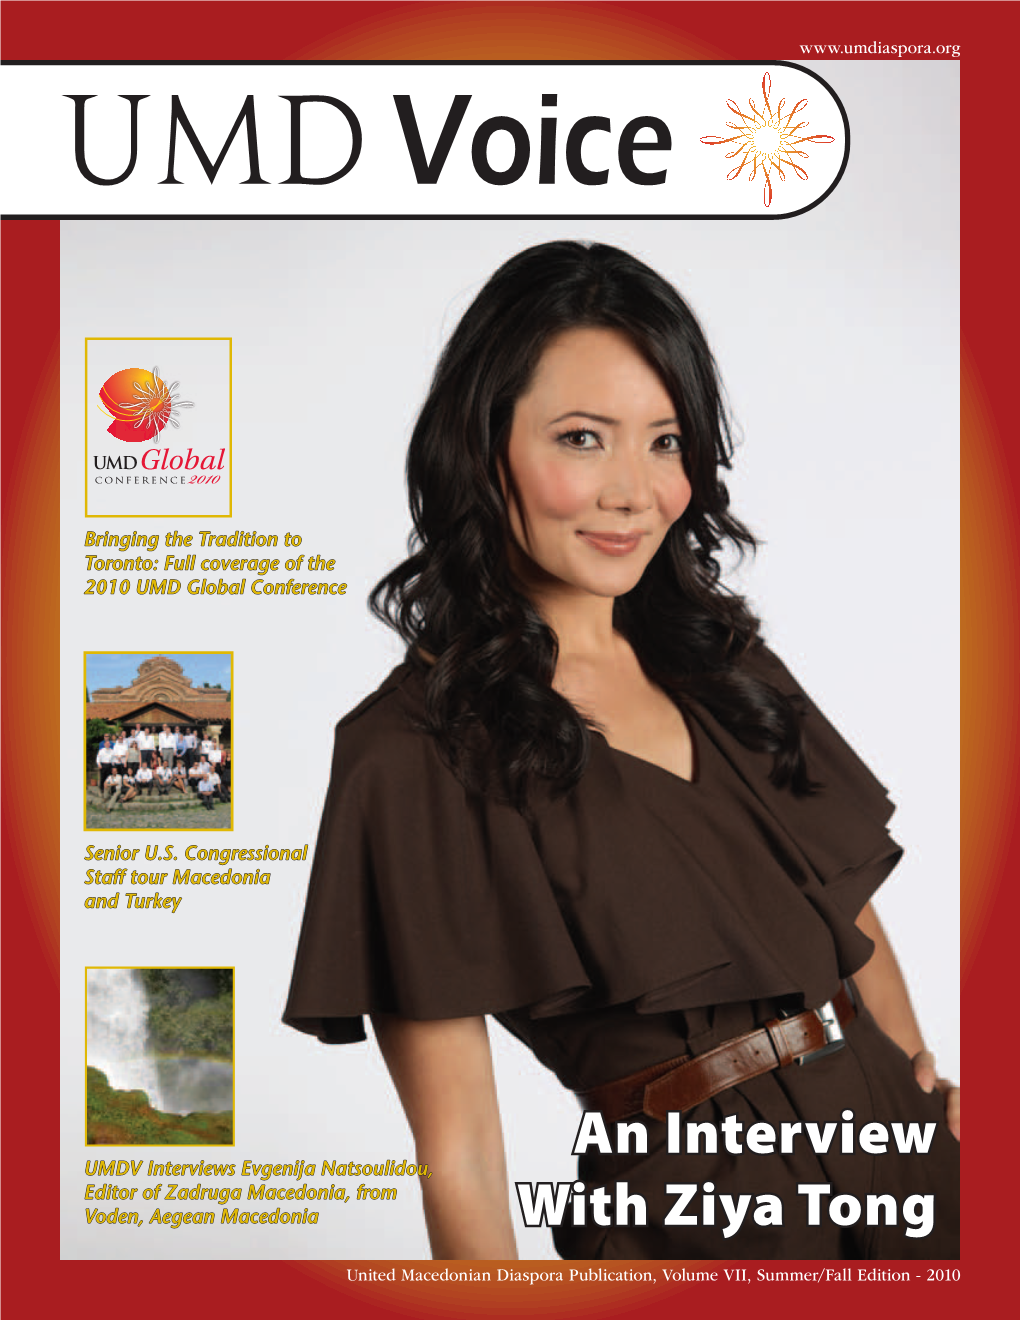 An Interview with Ziya Tong Editor Journalist and TV Personality Discusses Her Mark Branov Macedonian Roots Editor@Umdiaspora.Org